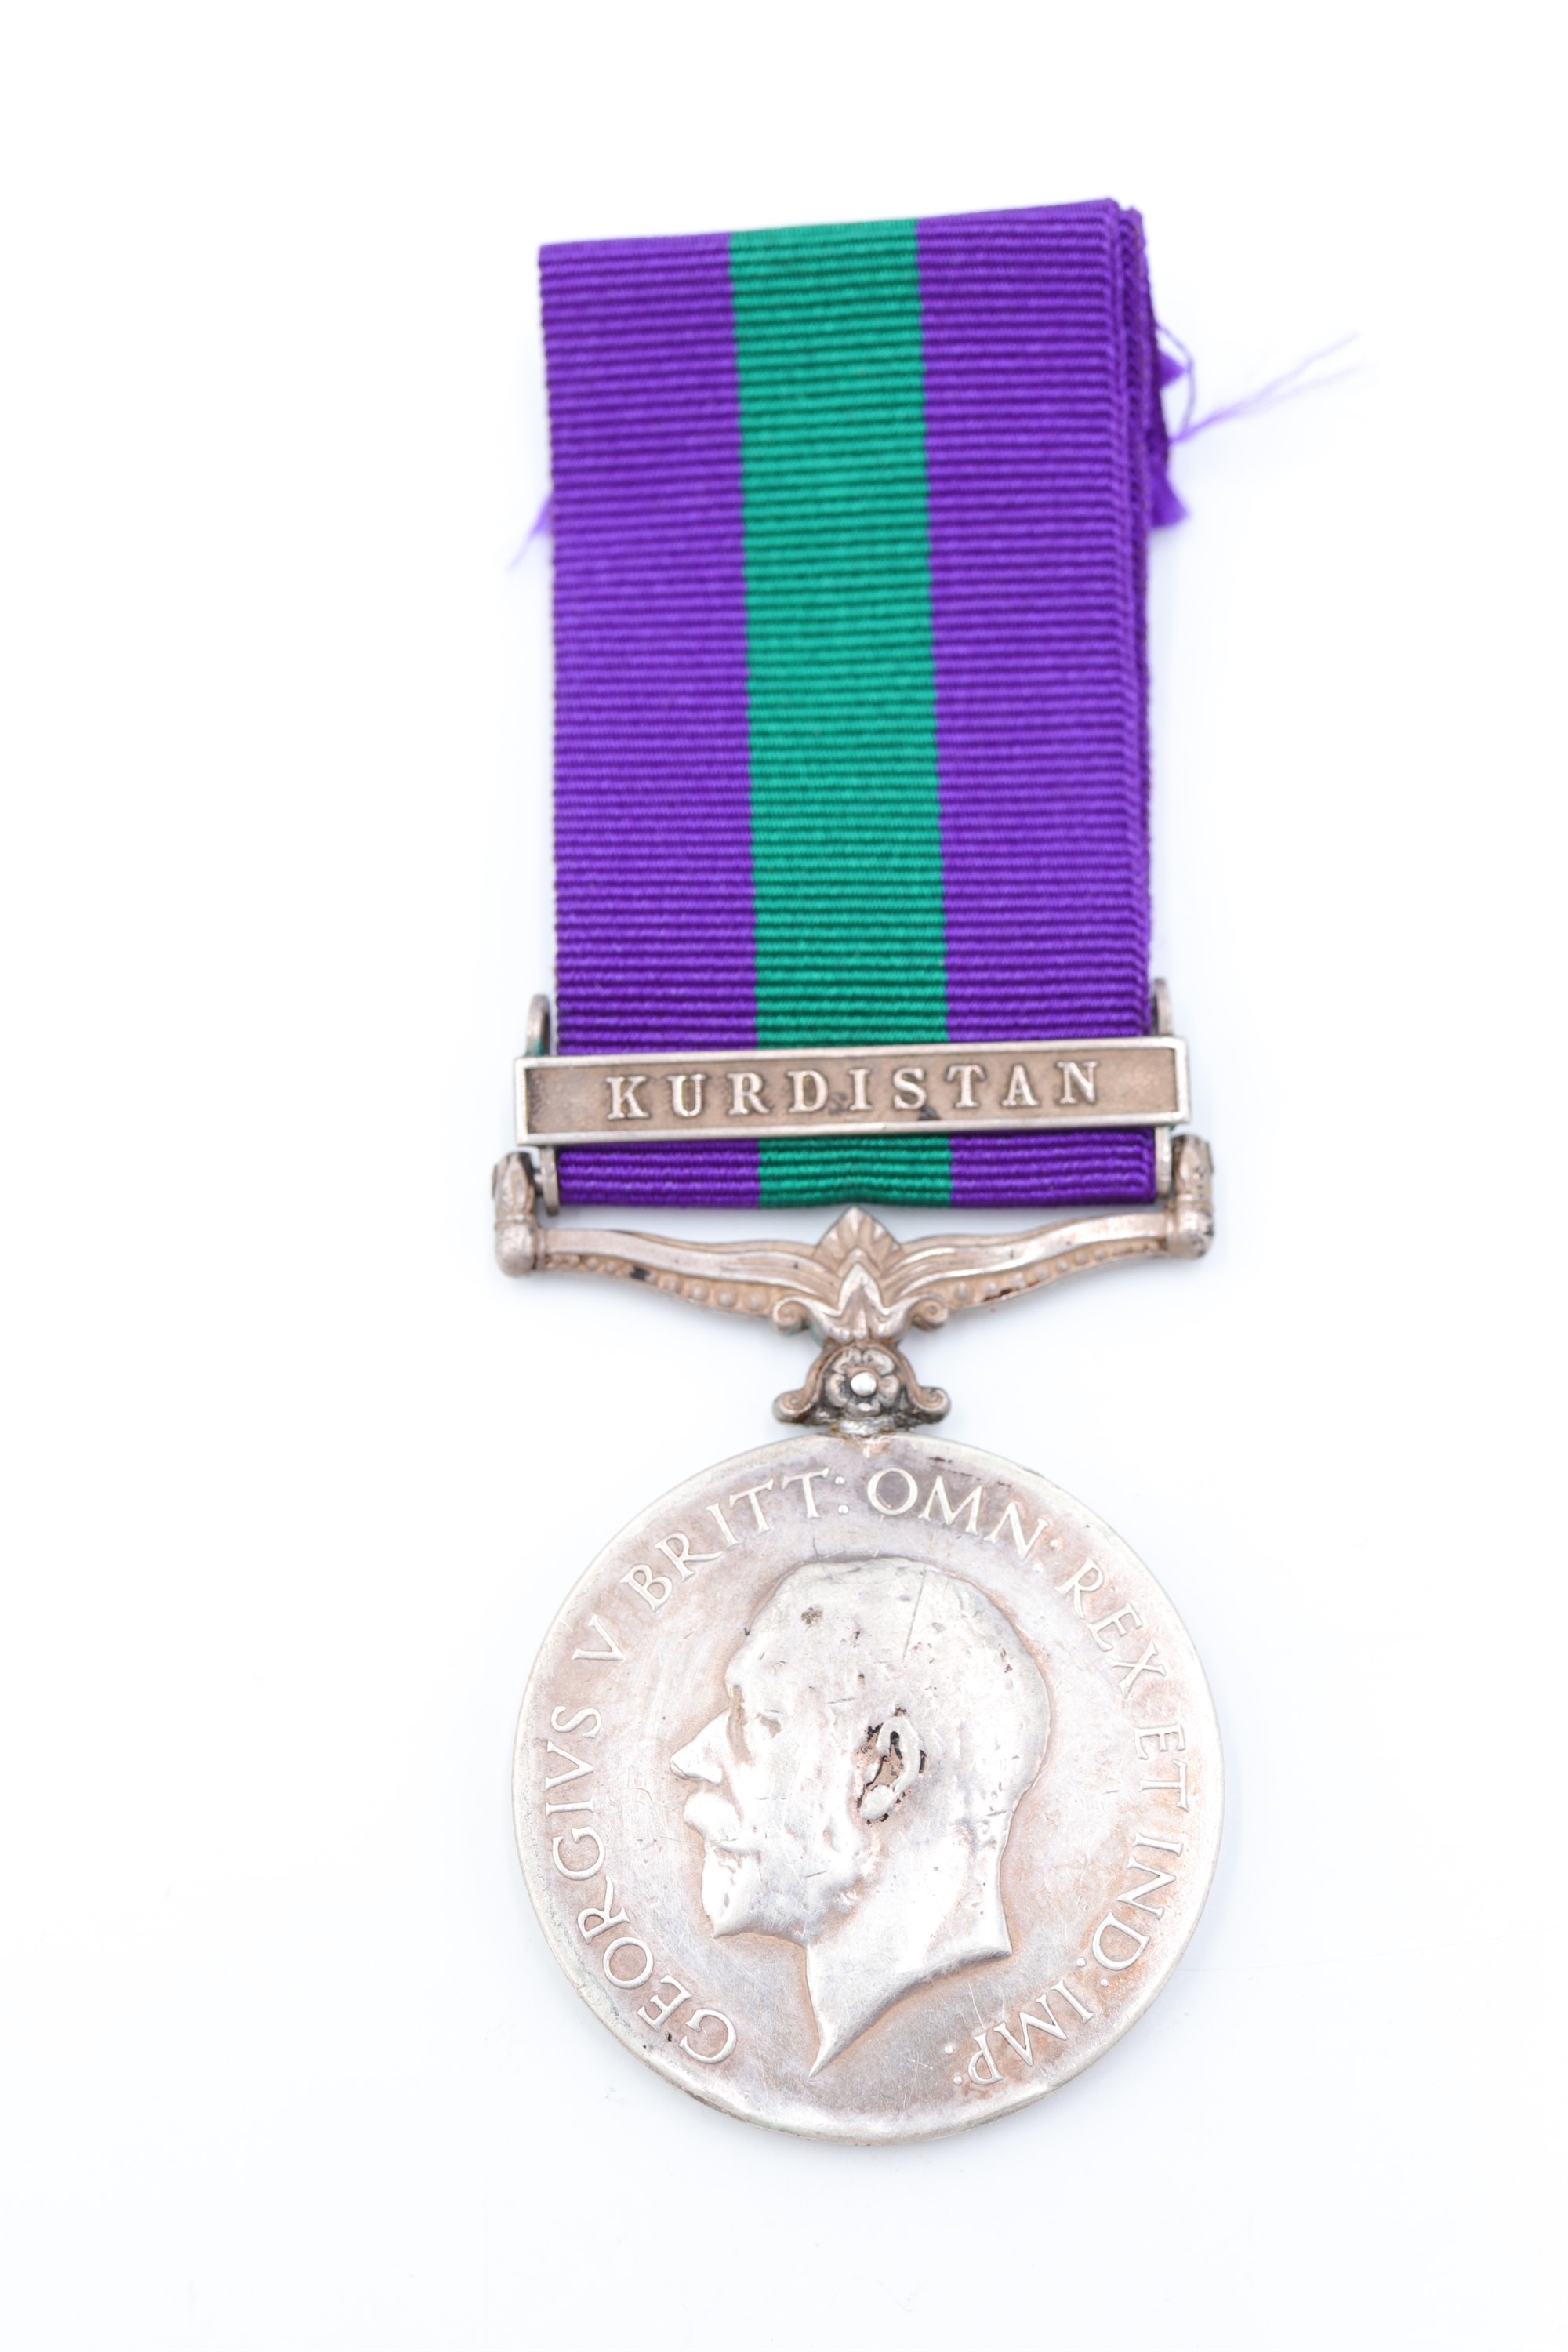 A General Service Medal with Kurdistan clasp to 3237673 Pte A L Urry, Cameronians